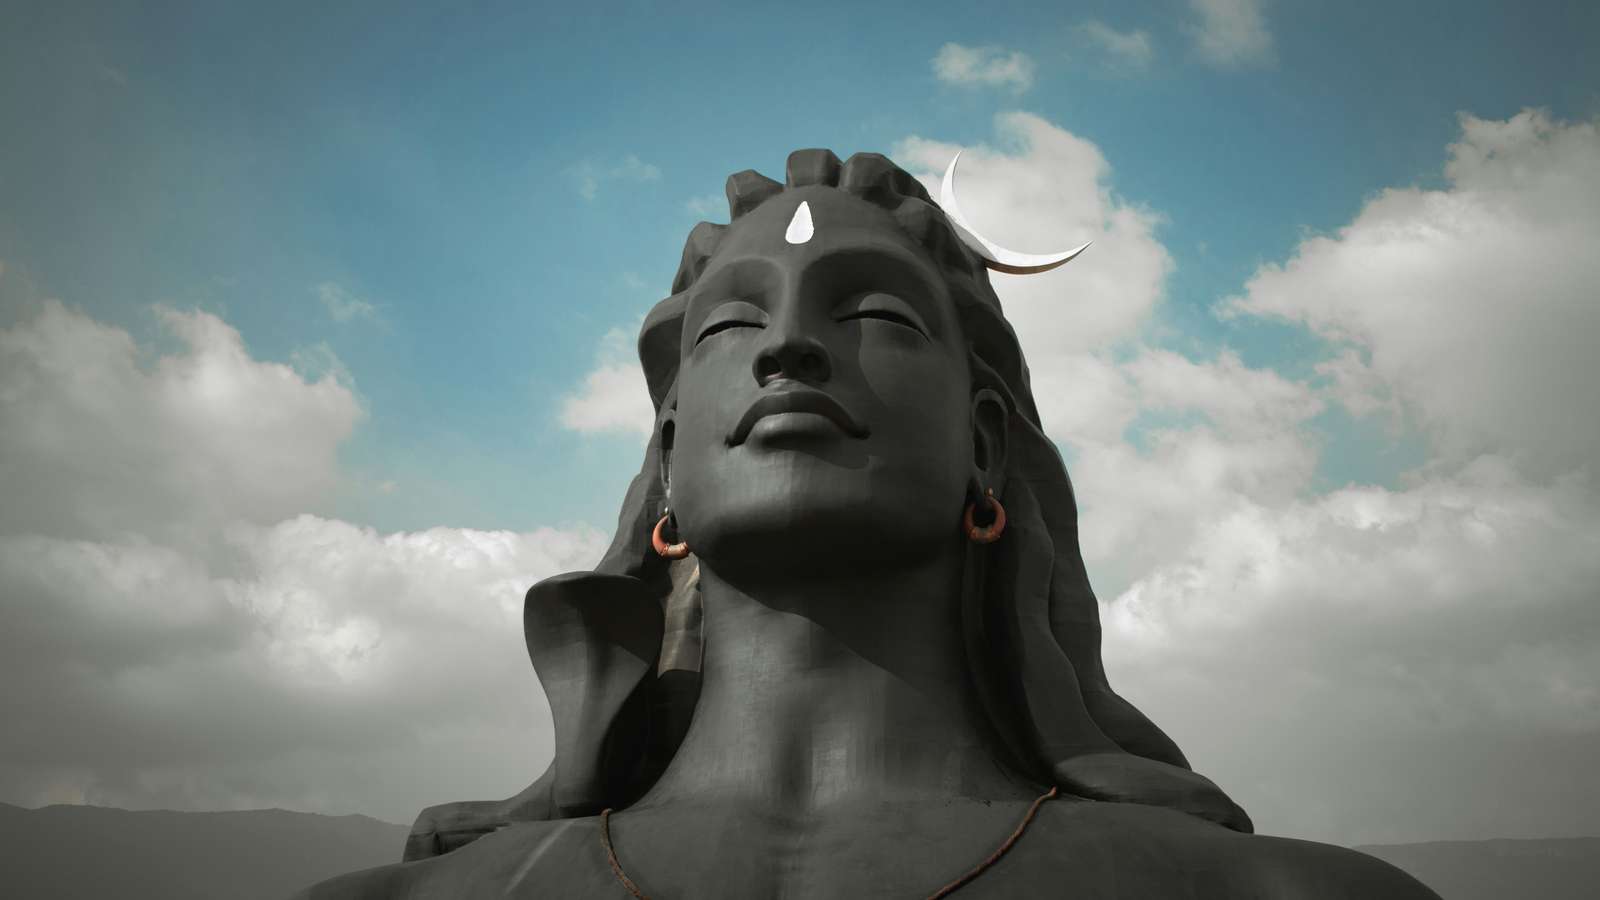 Lord Shiva online puzzle